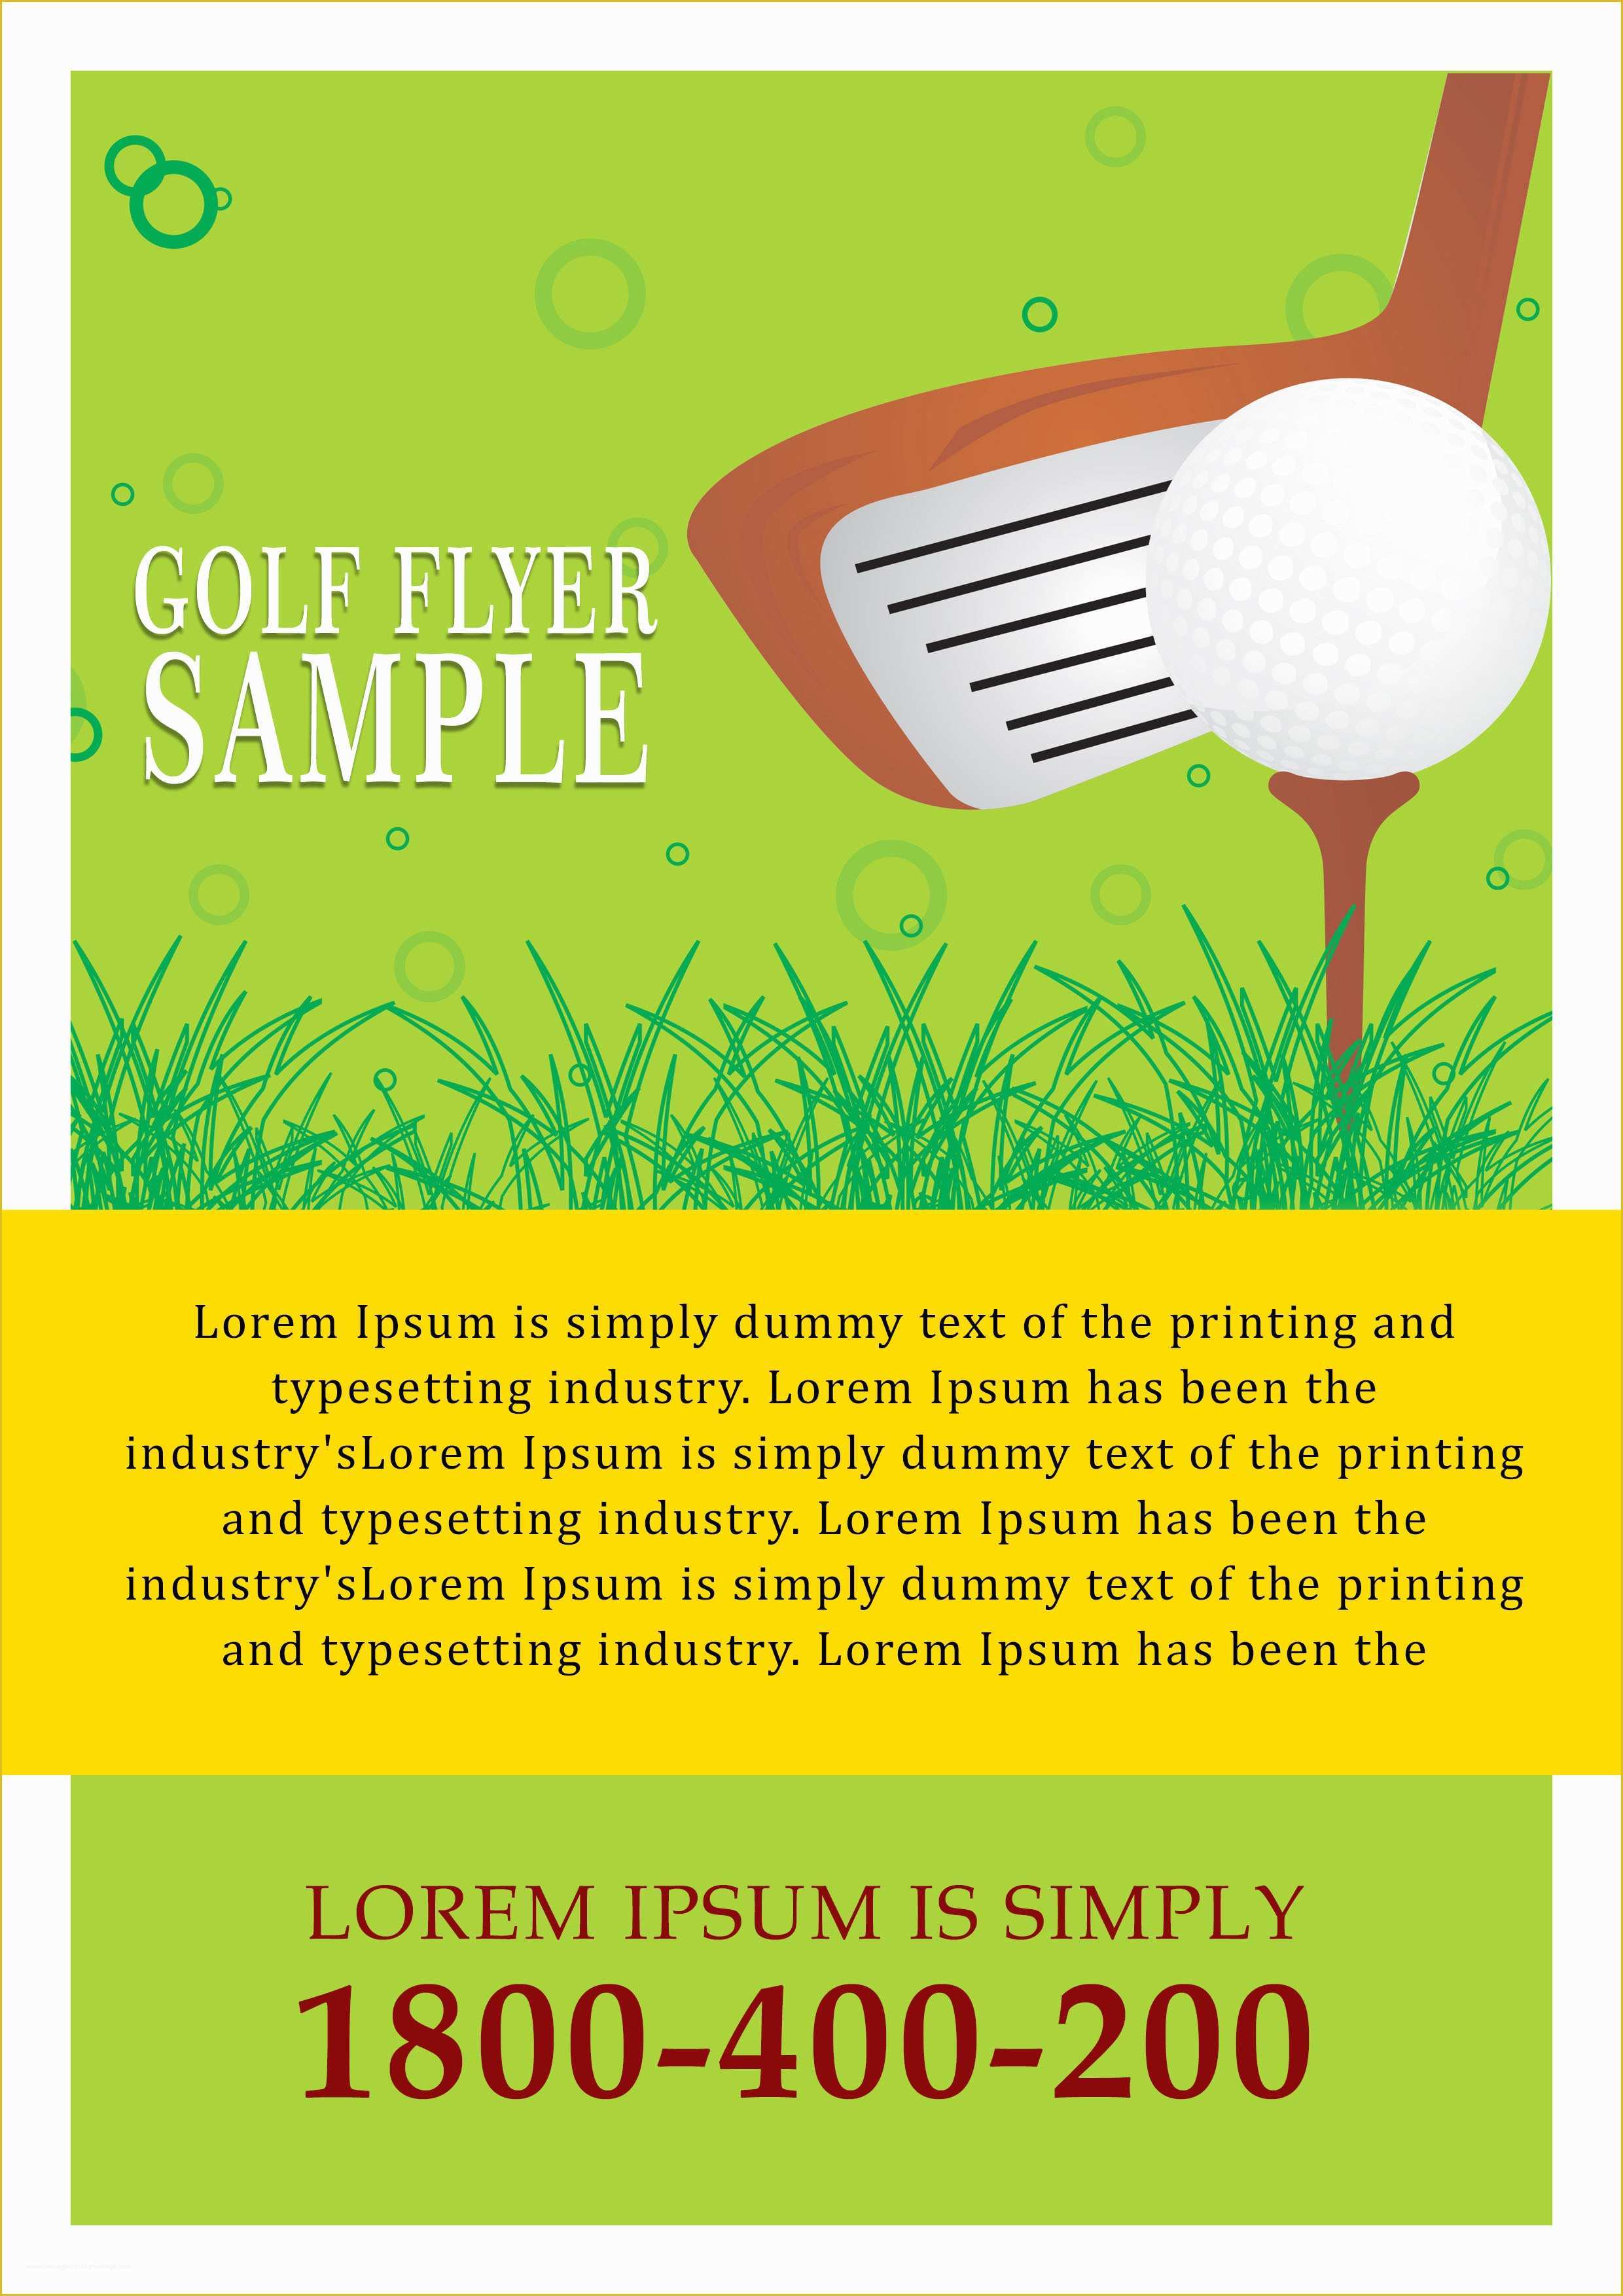 Charity Flyer Template Free Of 15 Free Golf tournament Flyer Templates Fundraiser